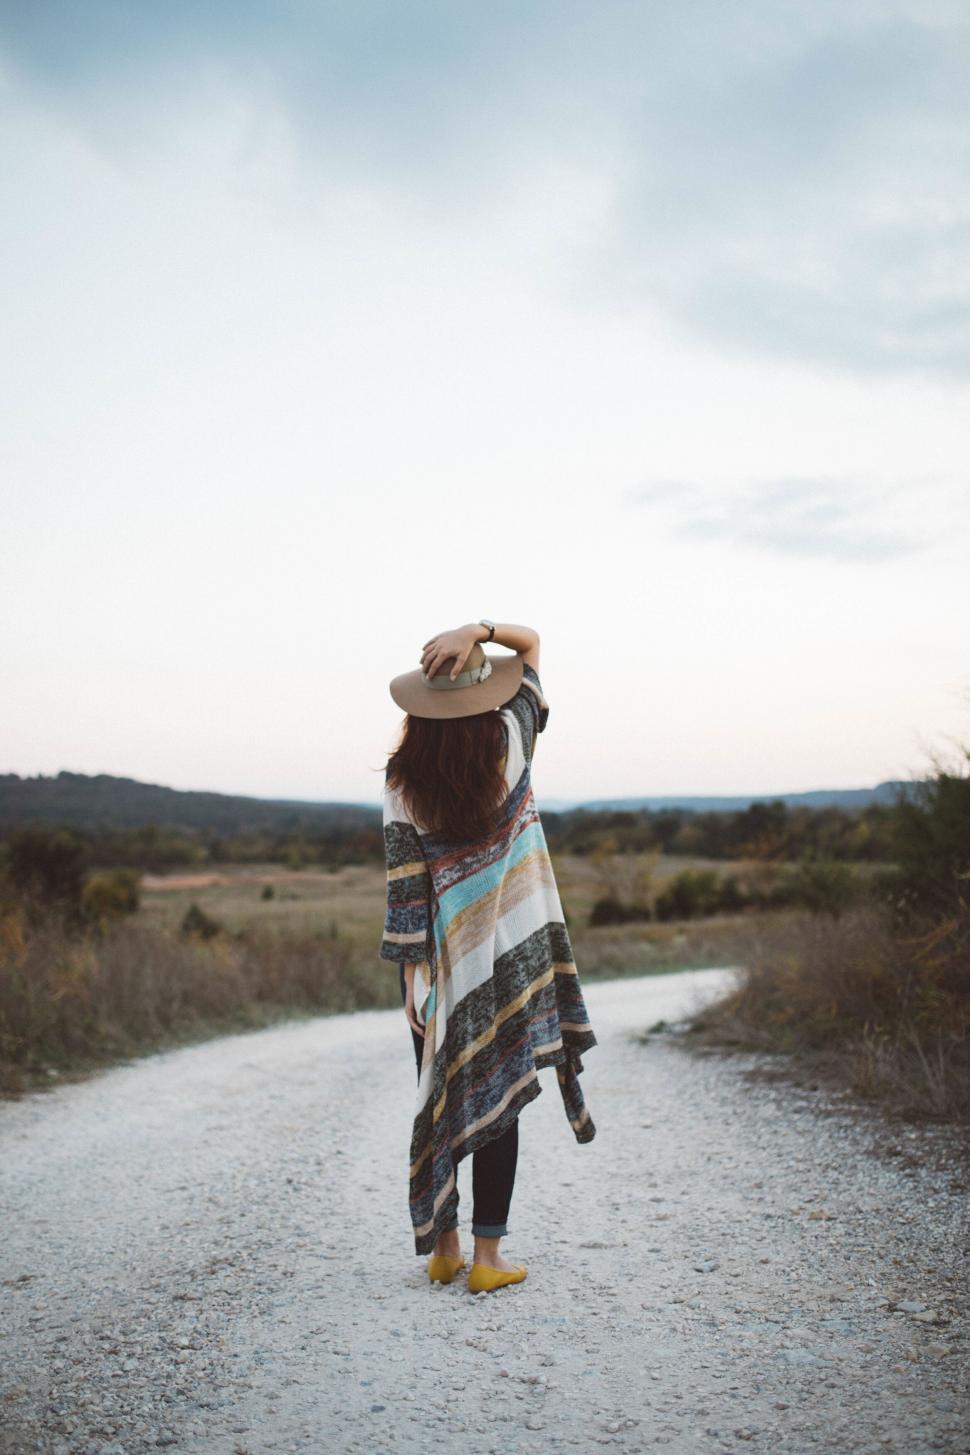 Free Image of Rustic woman standing on country road 